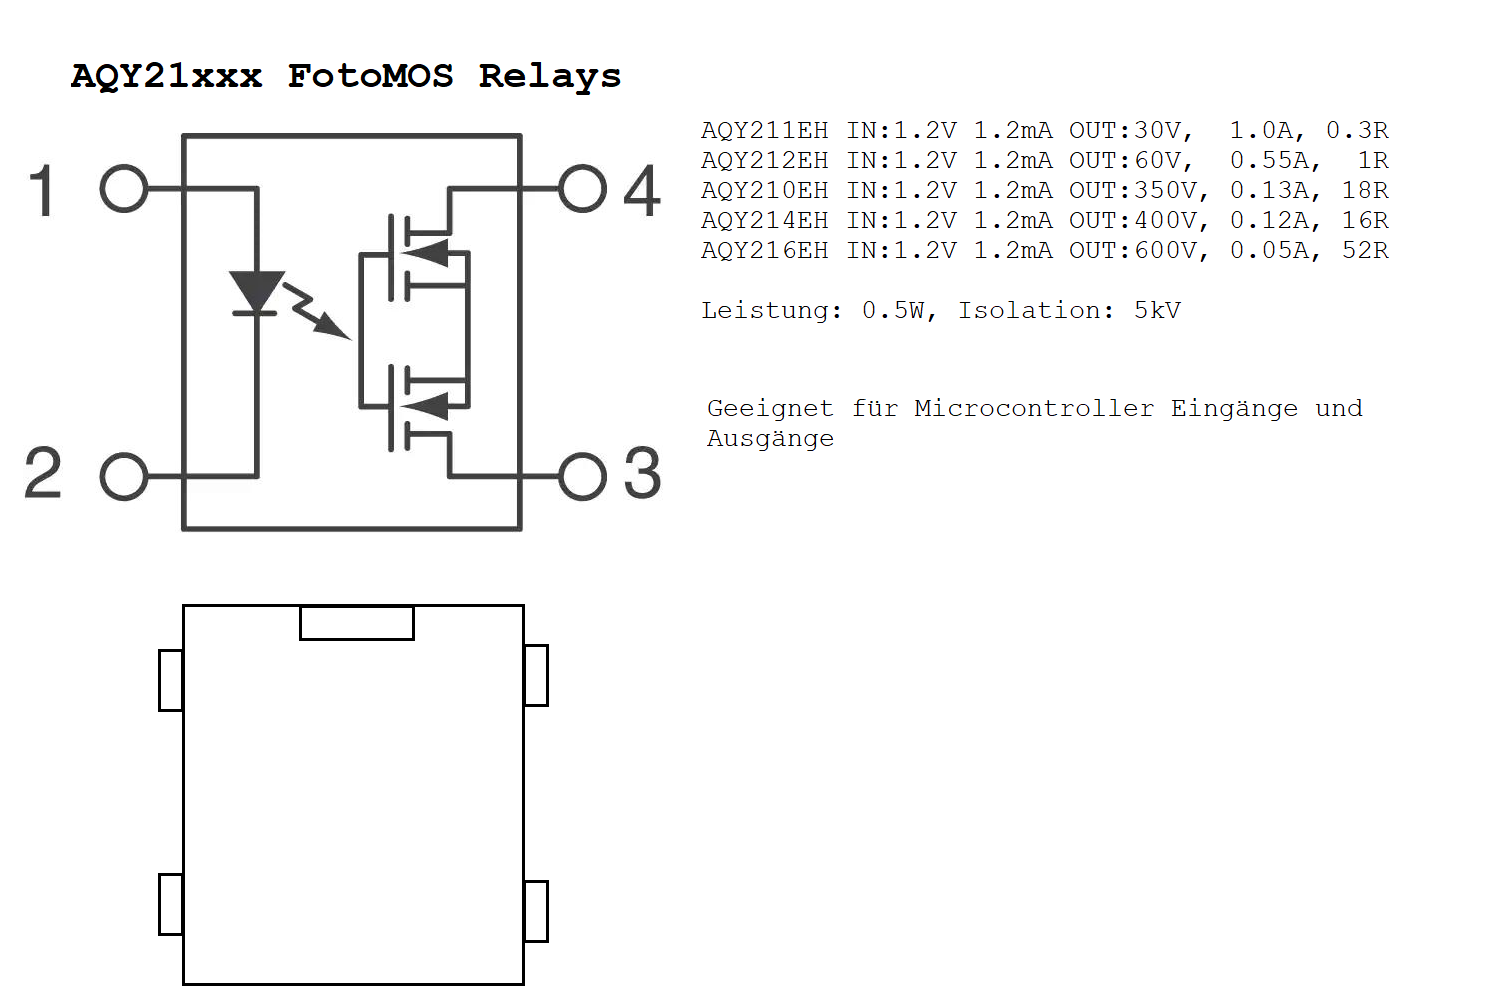 Optokoppler AQY210EH FotoMOS Relay DIL4 IN:1.2V 1.2mA OUT:350V 0.13A 18R